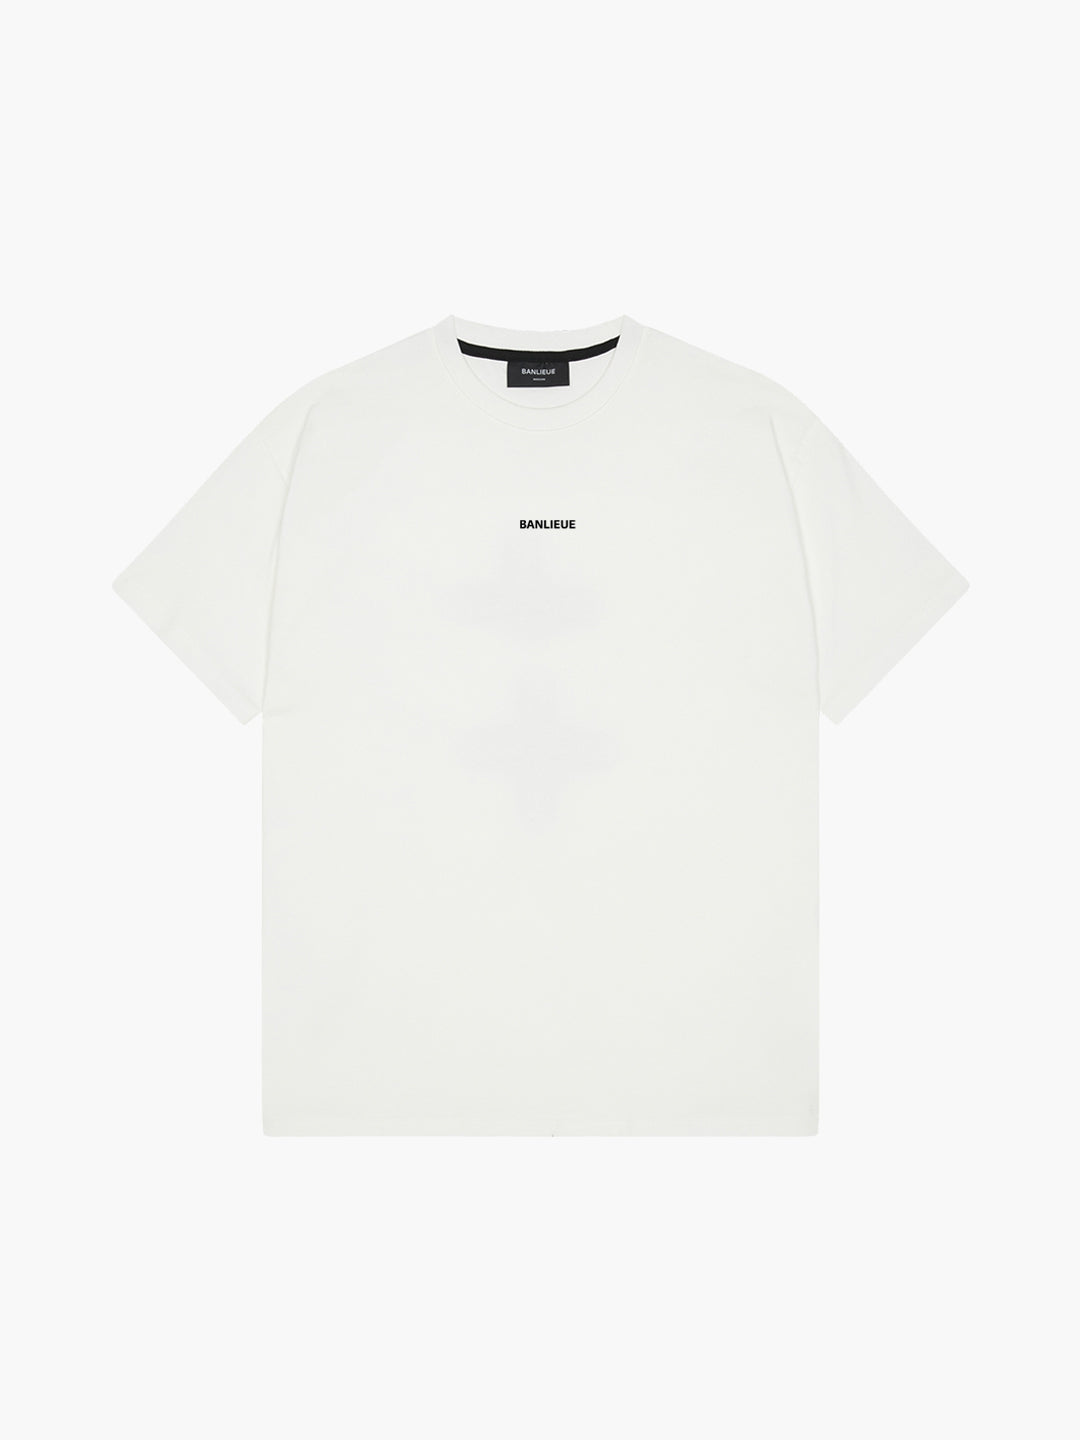 TRIBUTE T-SHIRT | WHITE / FOREST